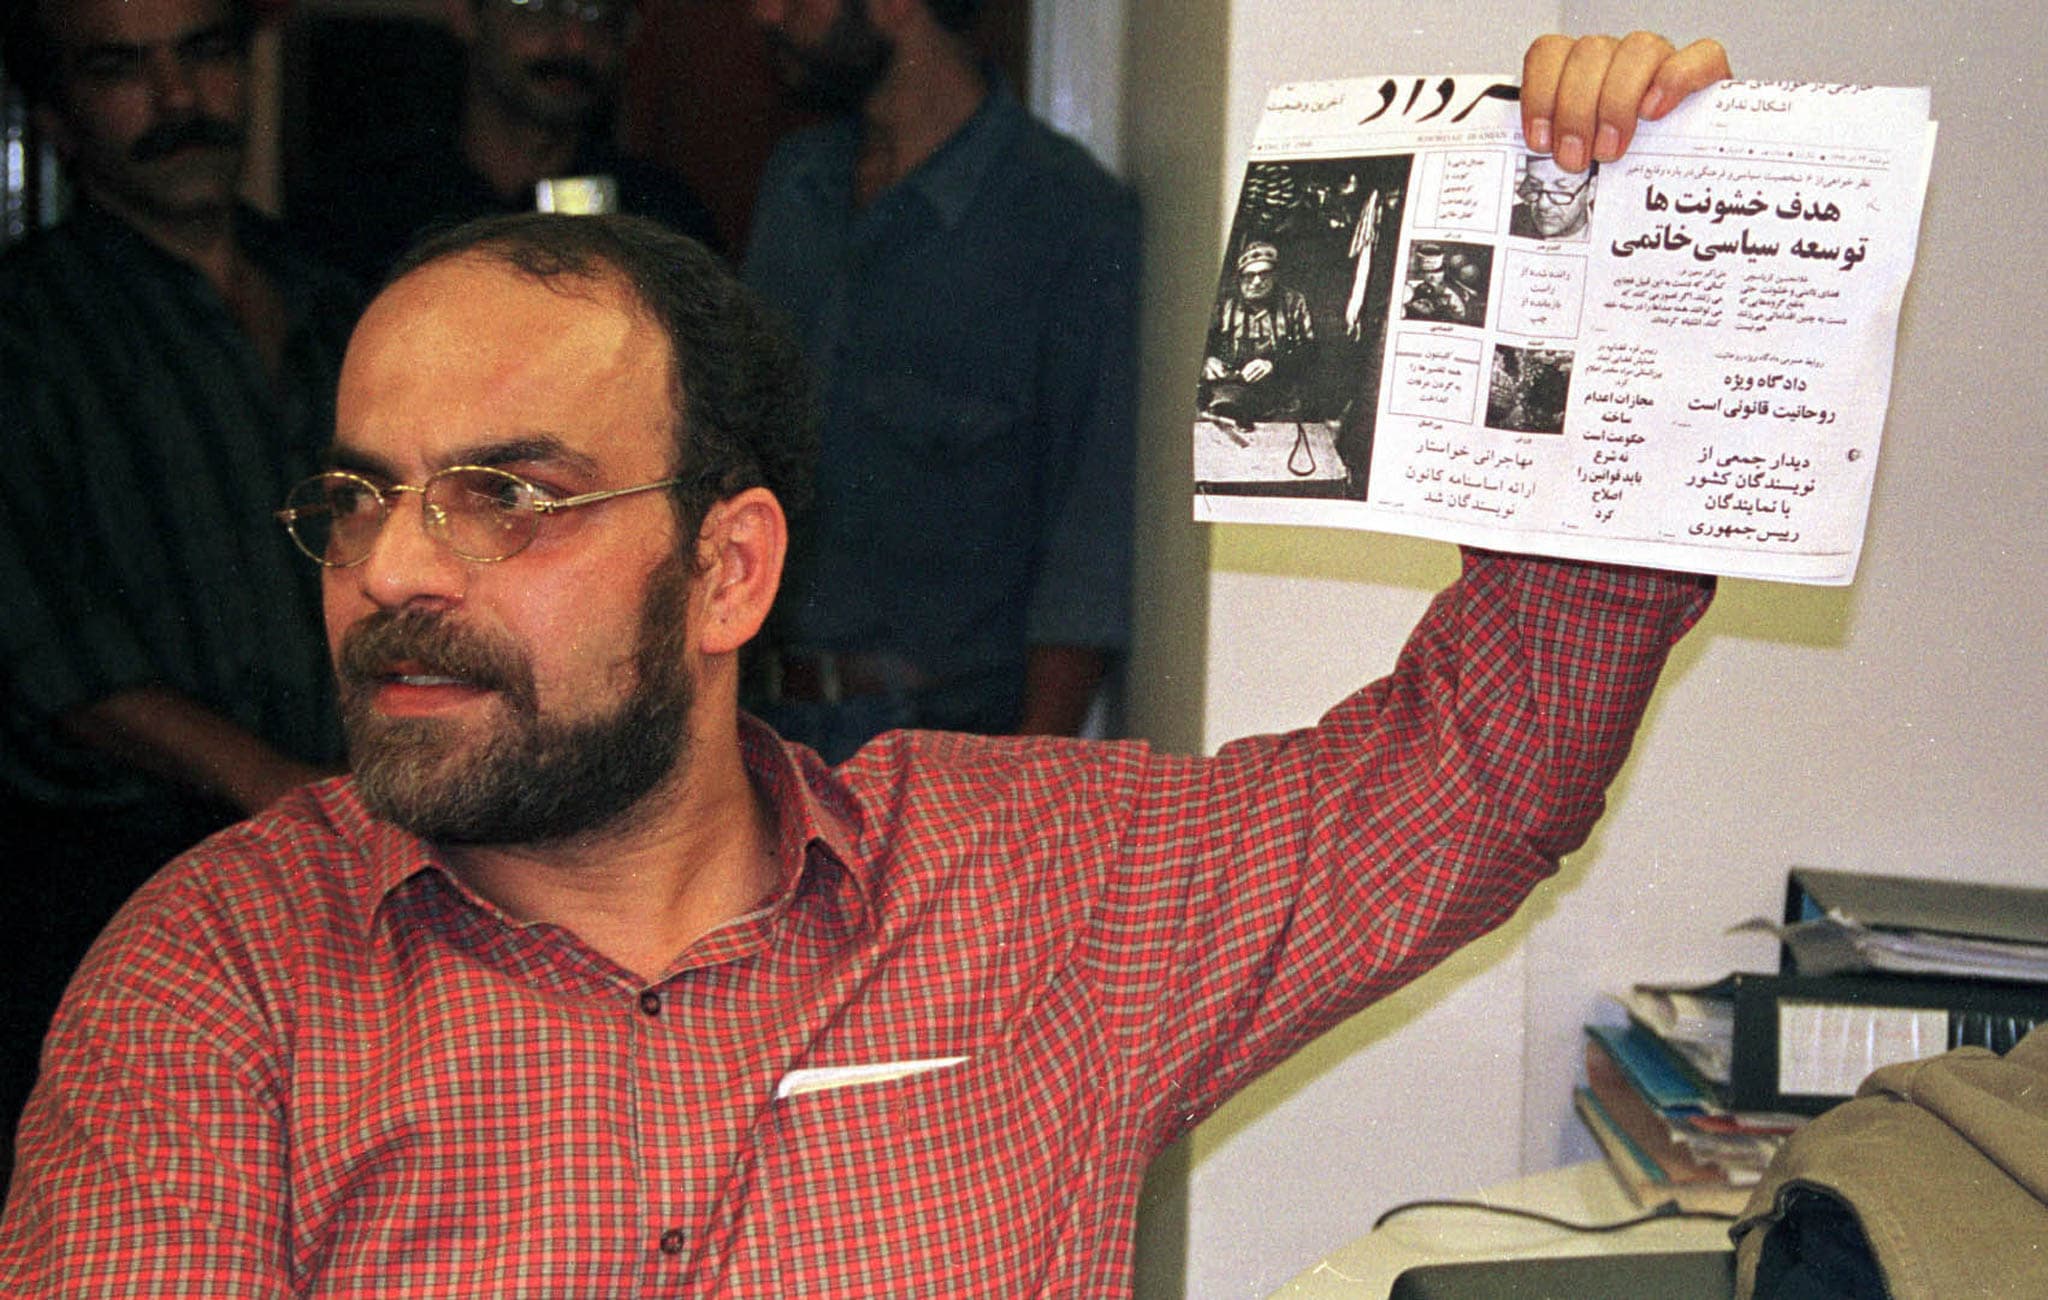 Mashallah Shamsolvaezin, the International Press Institute’s newest World Press Freedom Hero, holds a copy of Khordad newspaper in Iran in this 5 September 1999 photo, Reuters